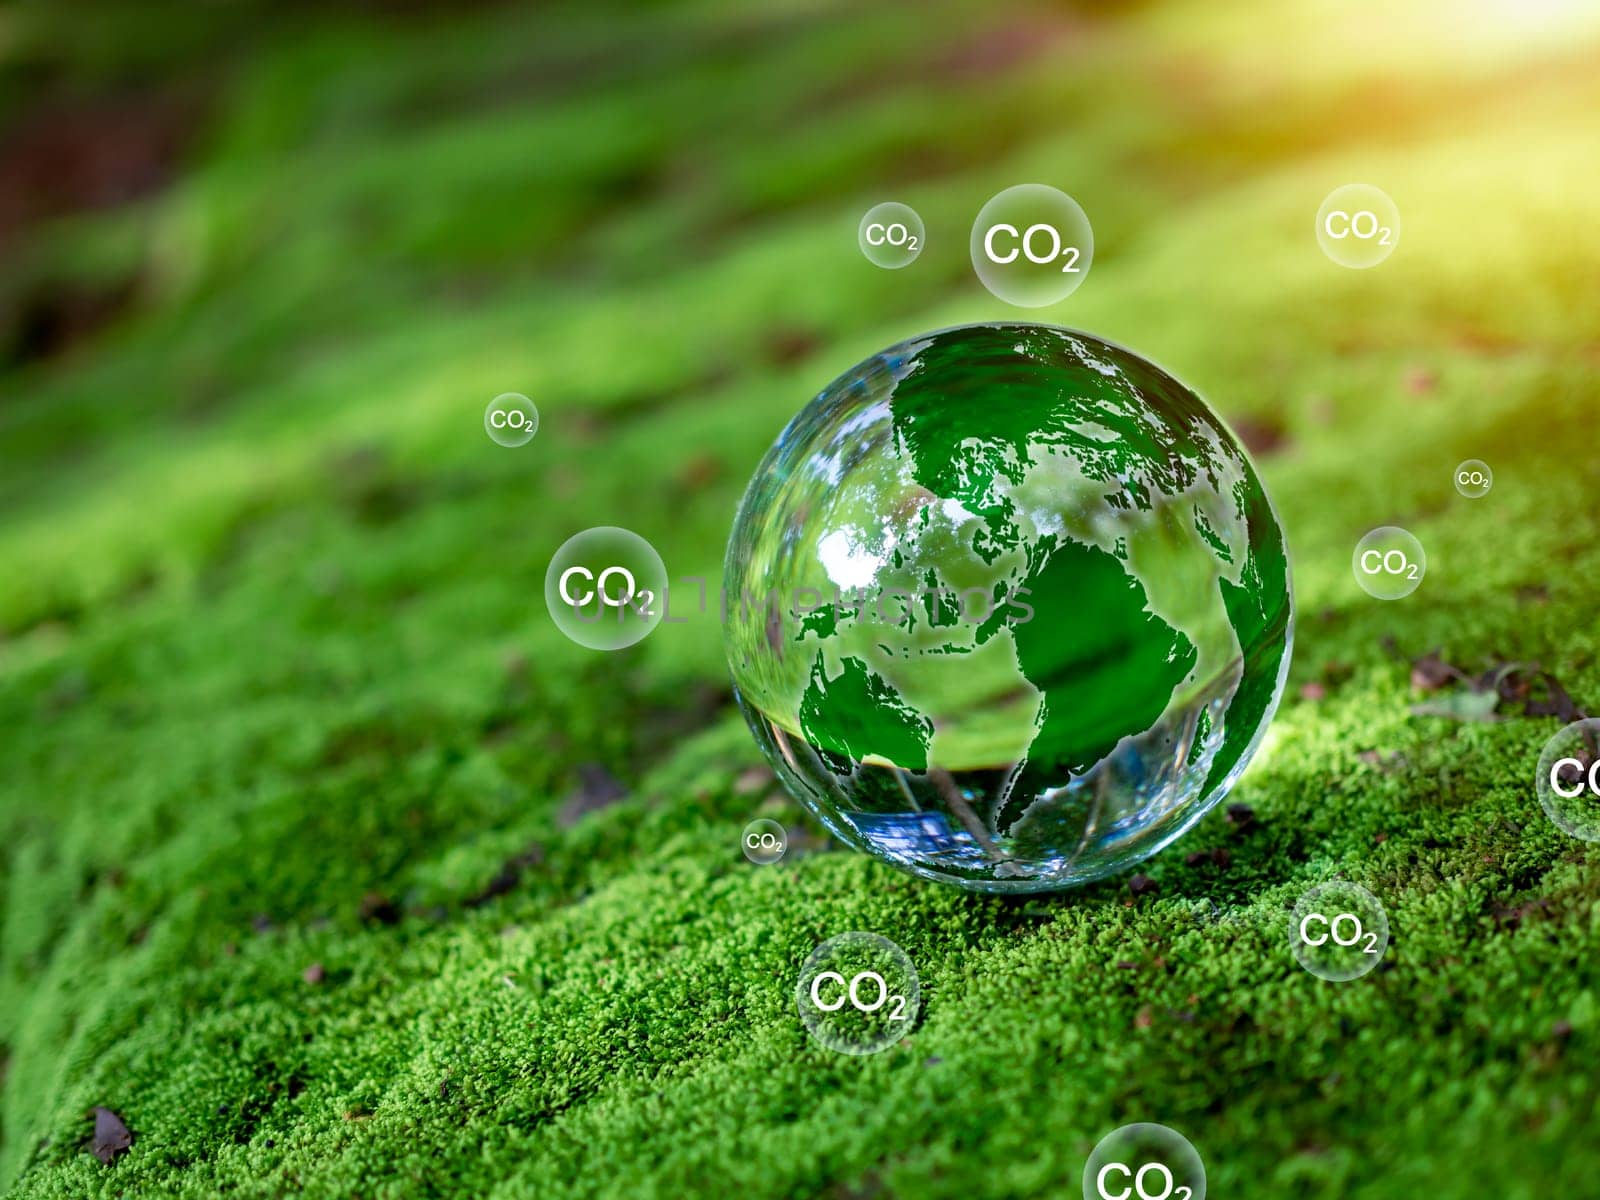 Crystal ball on moss in green forest. CO2 emission reduction concept, clean and friendly environment without carbon dioxide emissions. Planting trees to reduce CO2 emissions, environmental protection concept. by Unimages2527